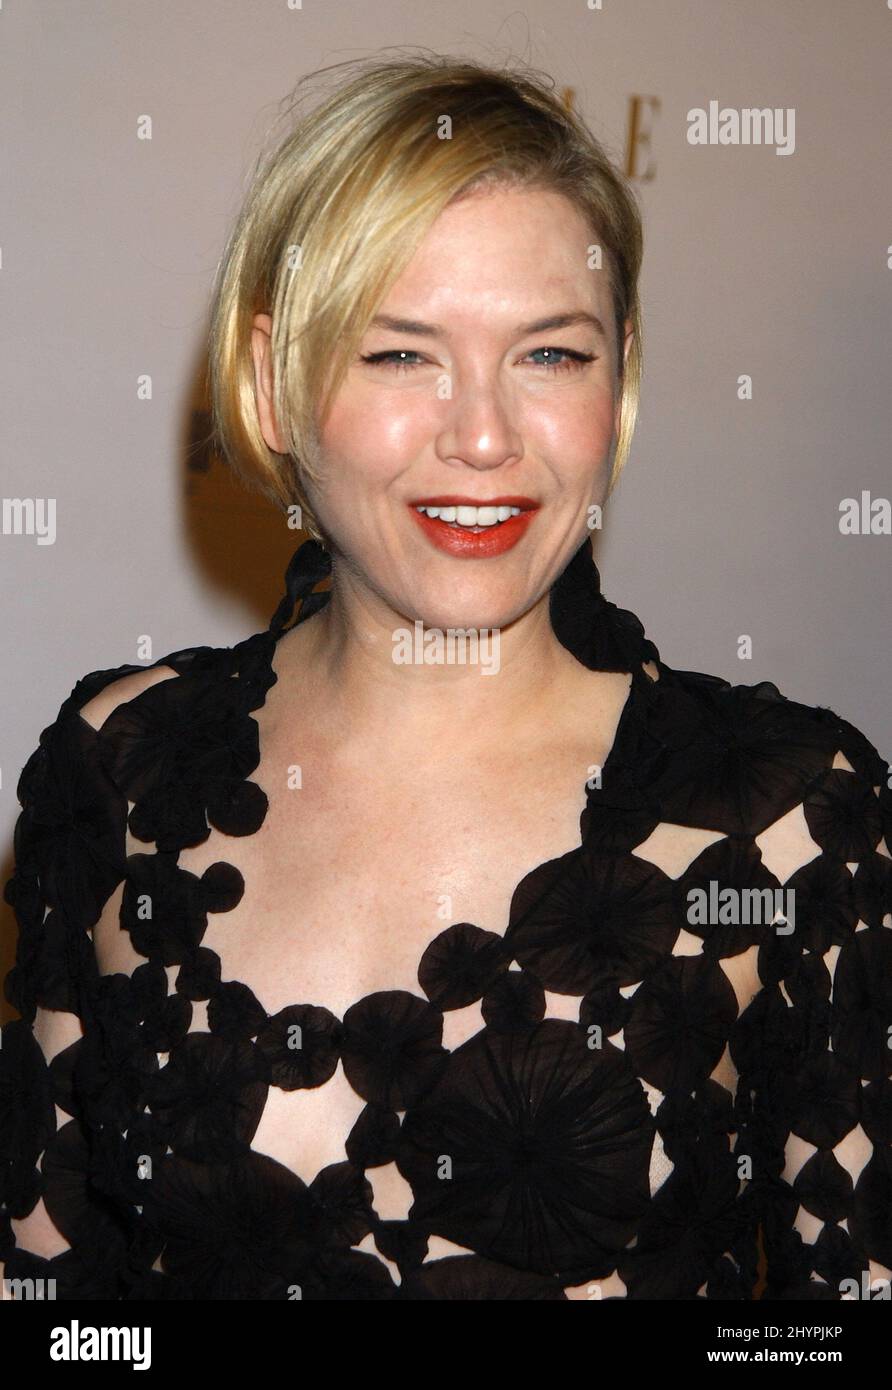 RENEE ZELLWEGER ATTENDS THE 'CHICAGO' PREMIERE AT THE ACADEMY THEATRE, BEVERLY HILLS. PICTURE: UK PRESS Stock Photo